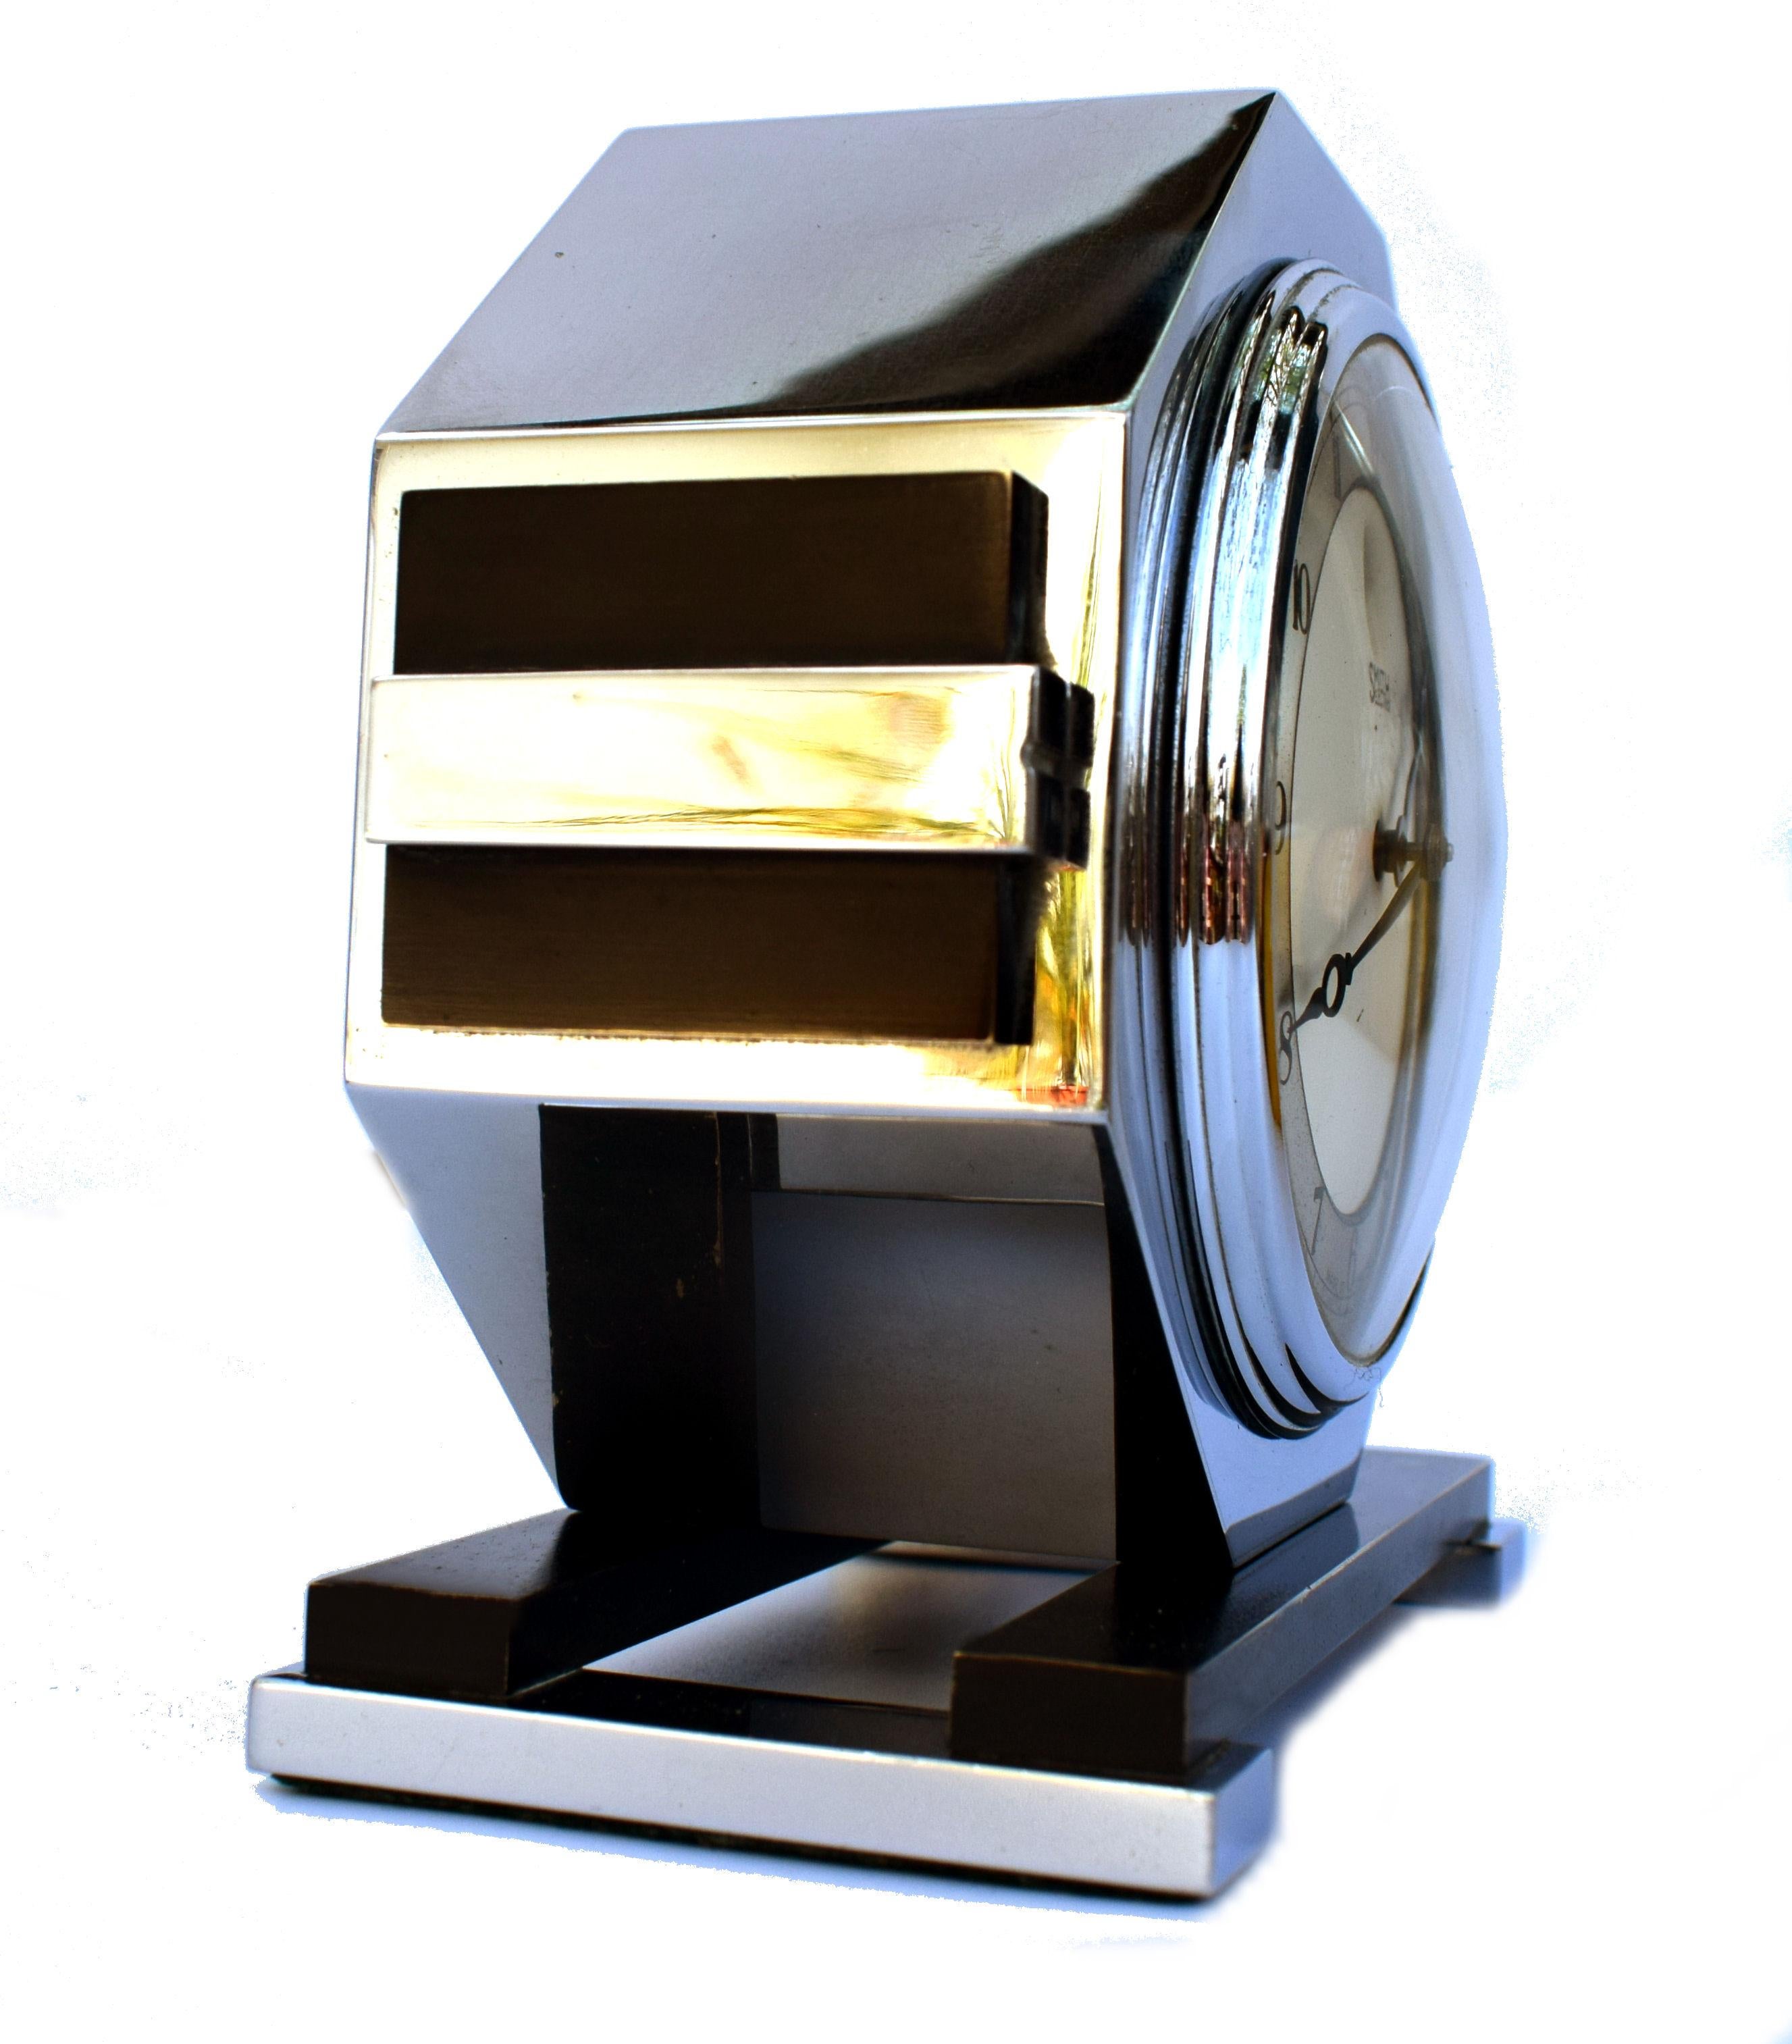 Machine Age 1930s Art Deco Chrome Clock by Smiths, England For Sale 1